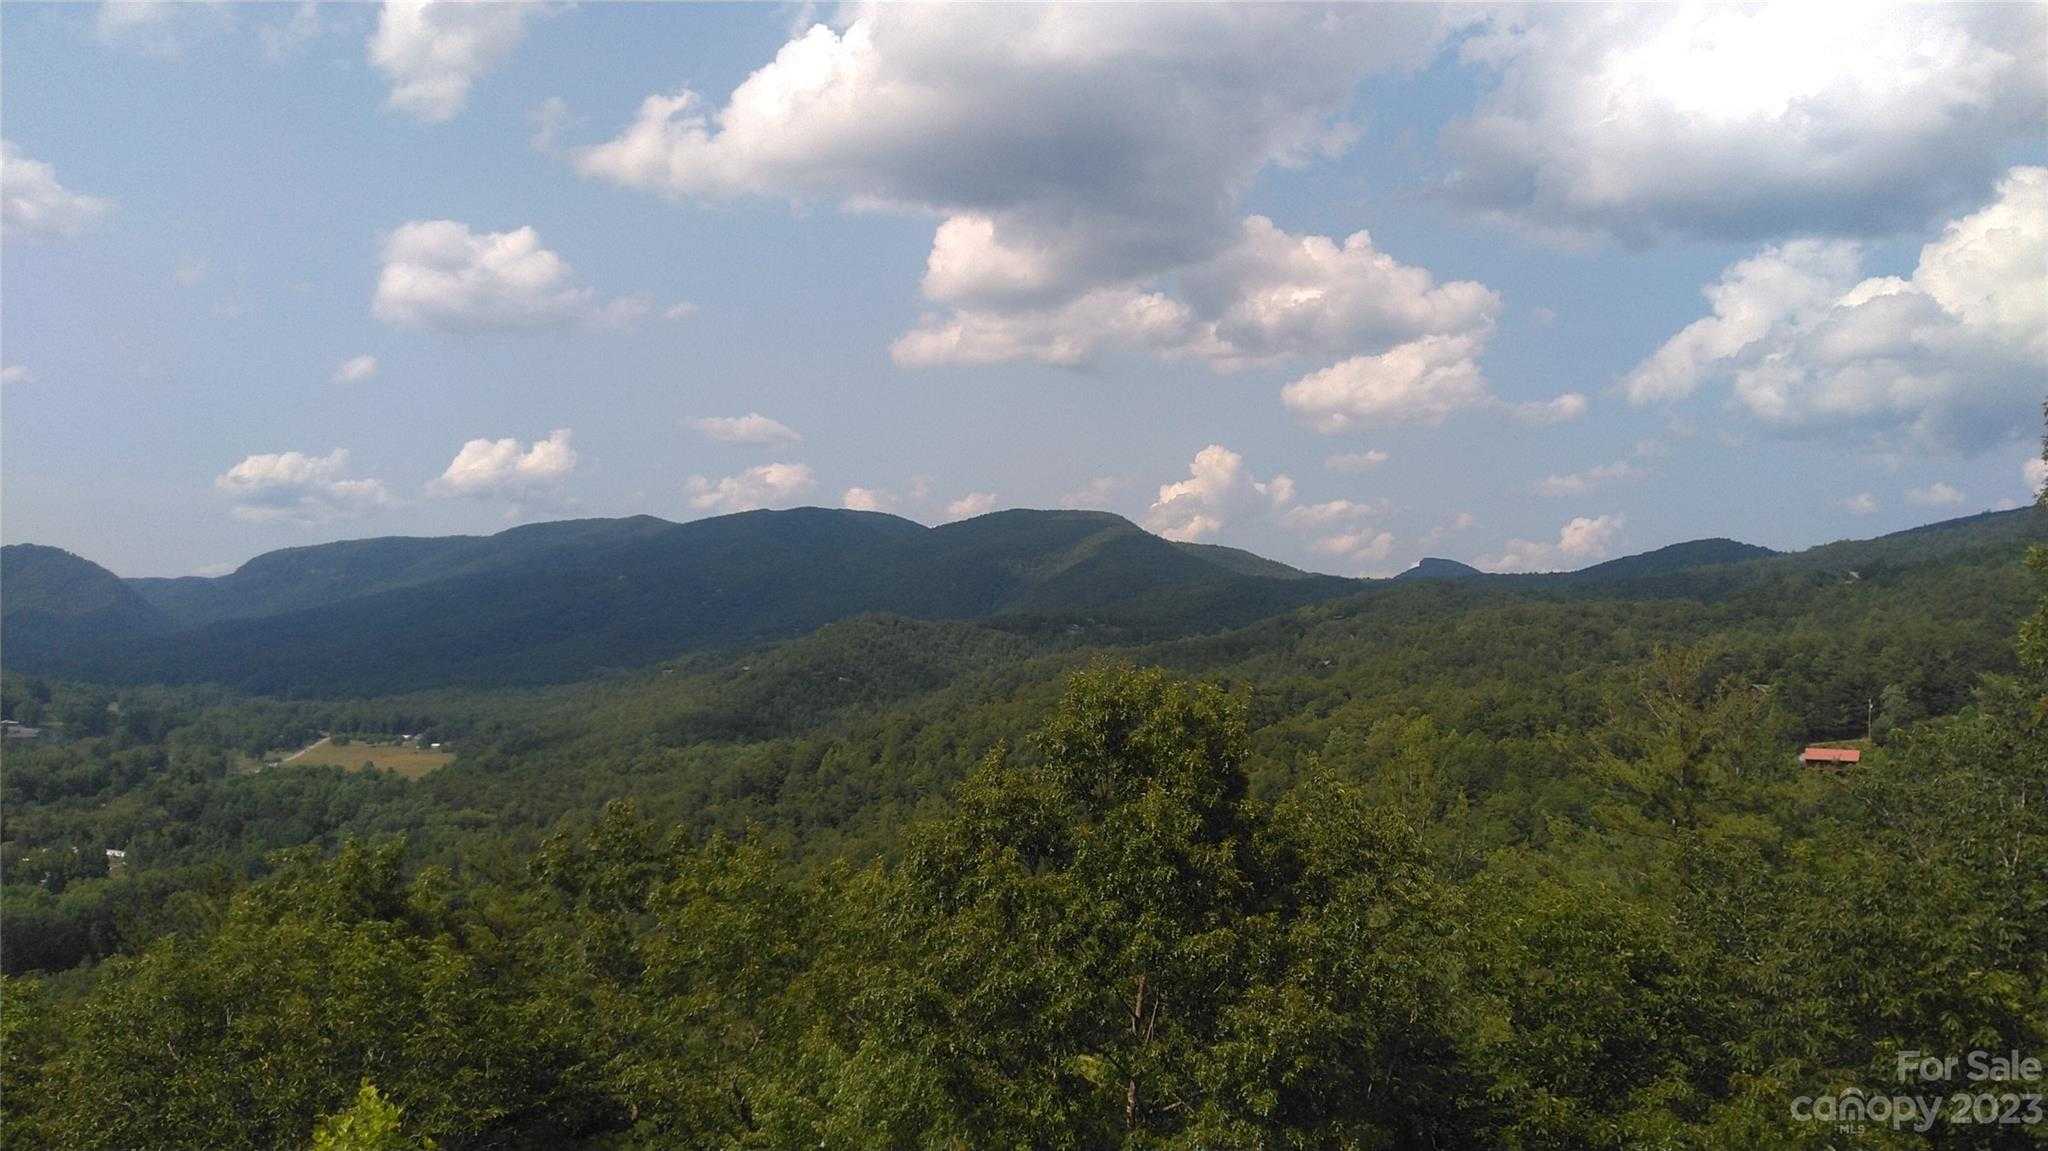 View Marion, NC 28752 land